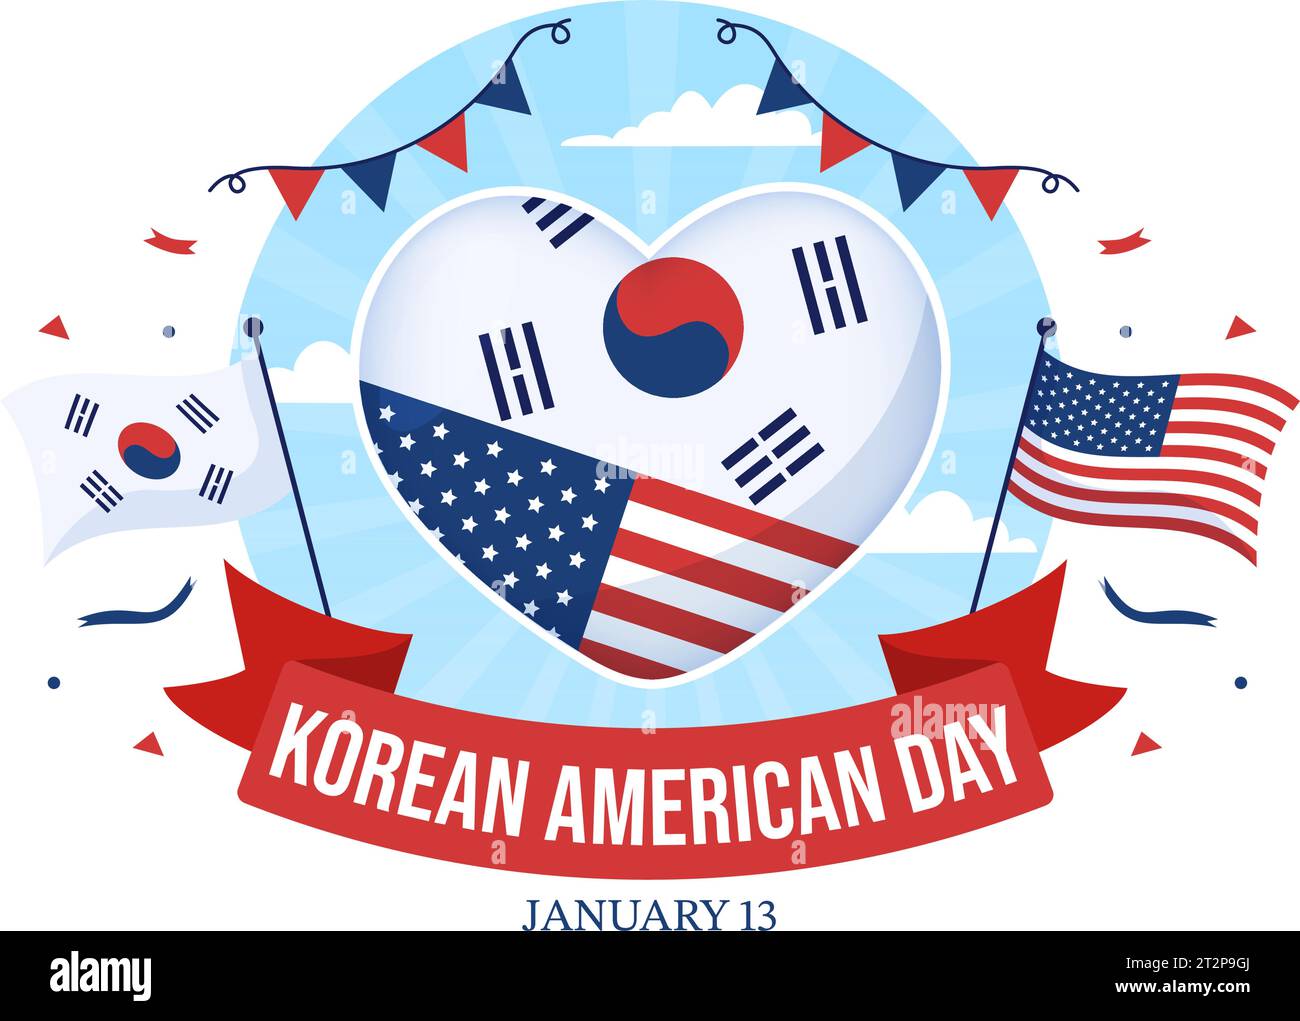 Korean American Day Vector Illustration on January 13 with USA and South Korean Flag to Commemorate Republic Of Alliance in Flat Background Design Stock Vector